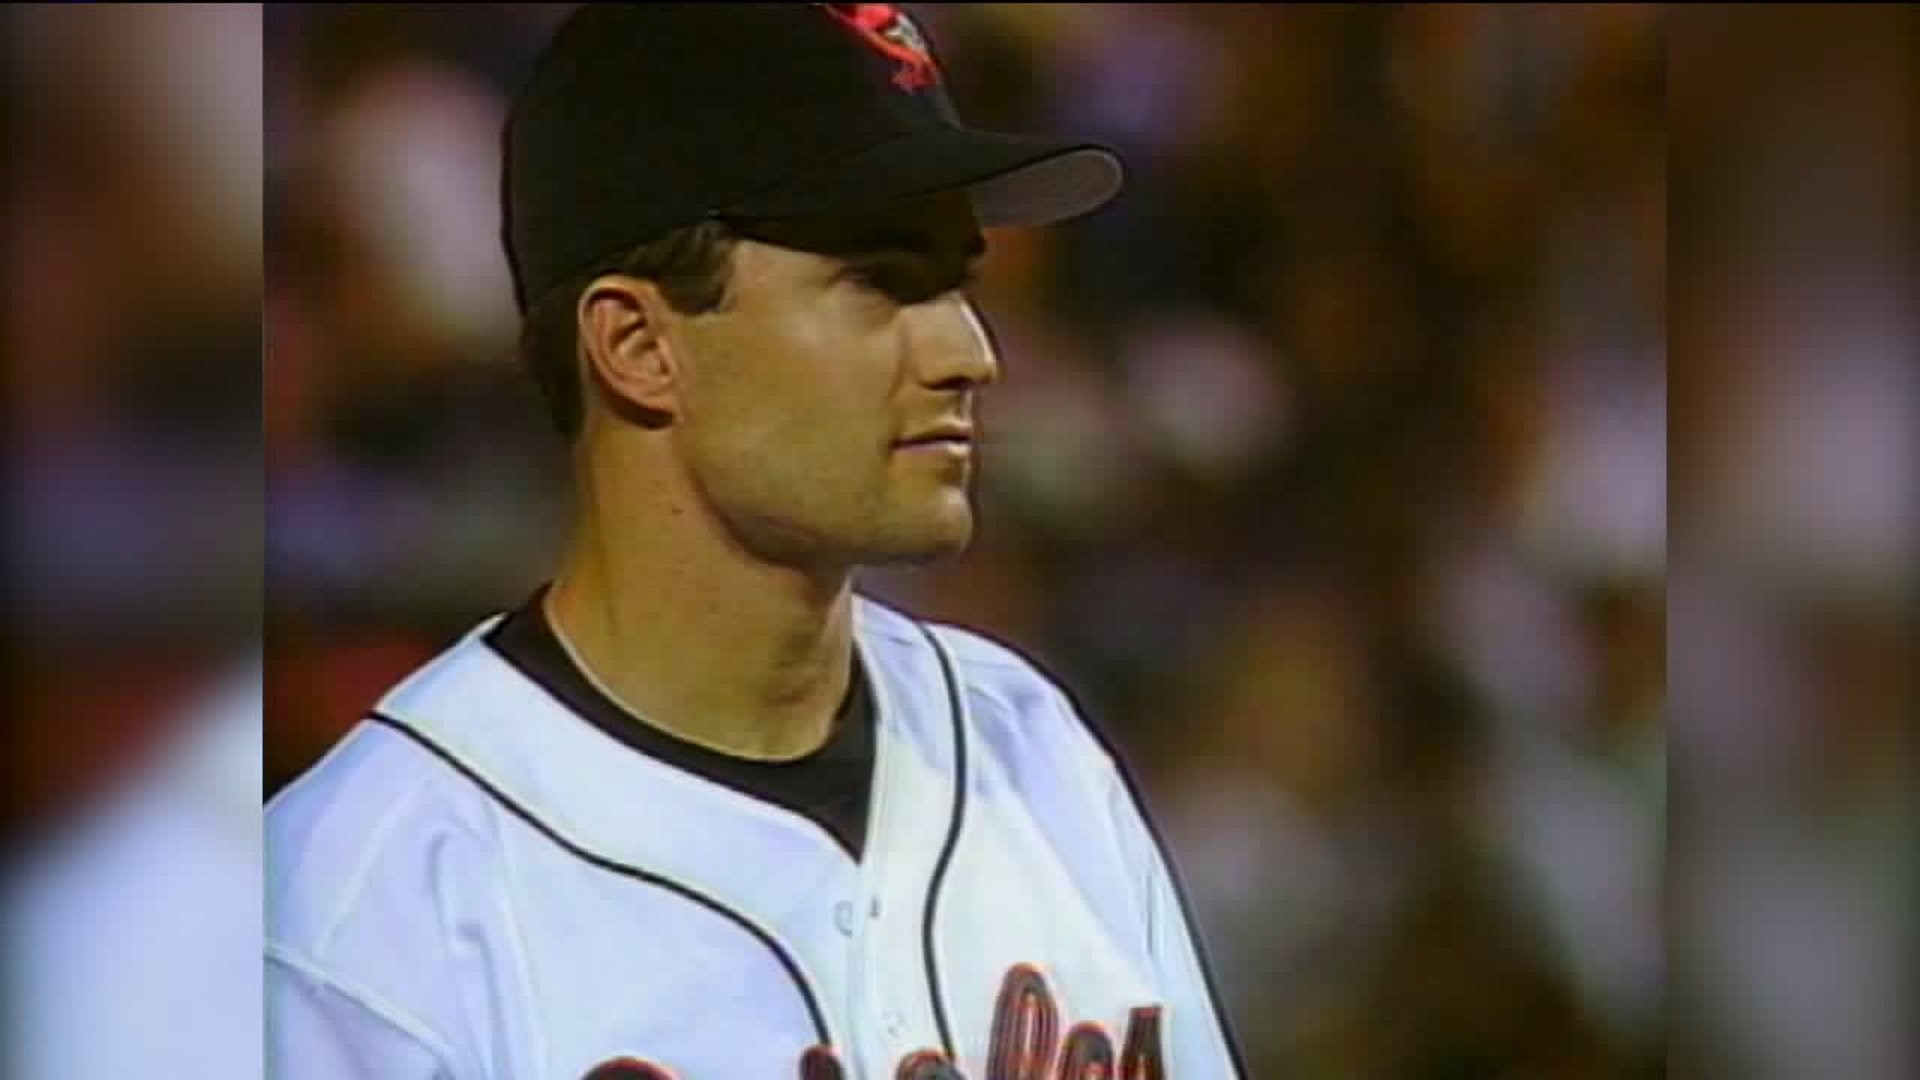 Mussina Learns He's Elected to Baseball Hall of Fame